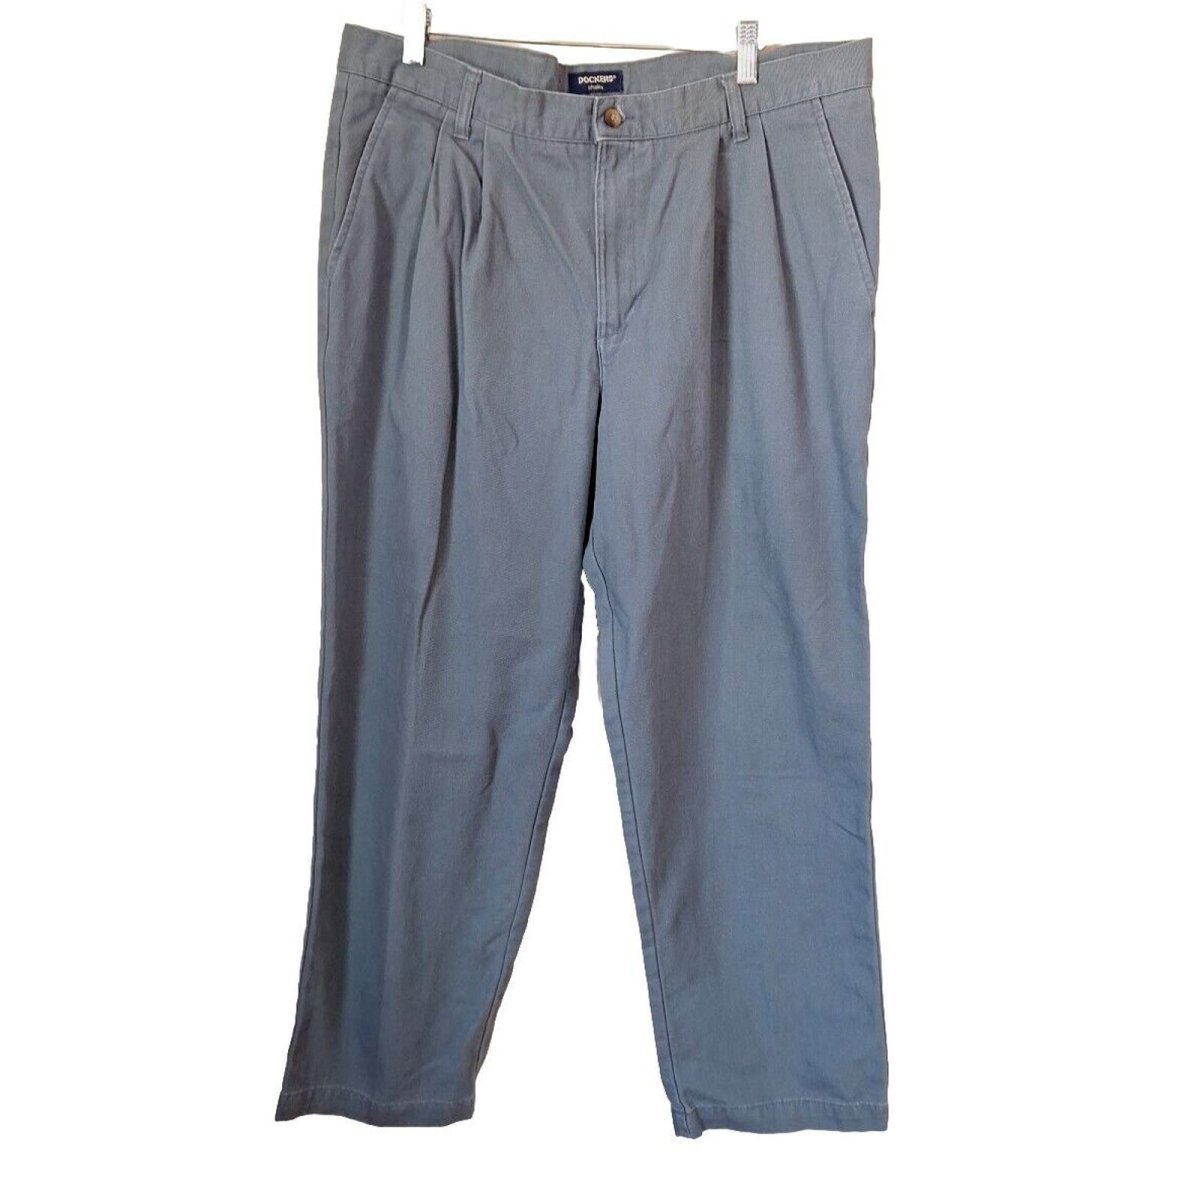 Vintage 90s All Cotton Pleated Gray Pants Men Size 38x29 - Relaxed Fit - themallvintage The Mall Vintage